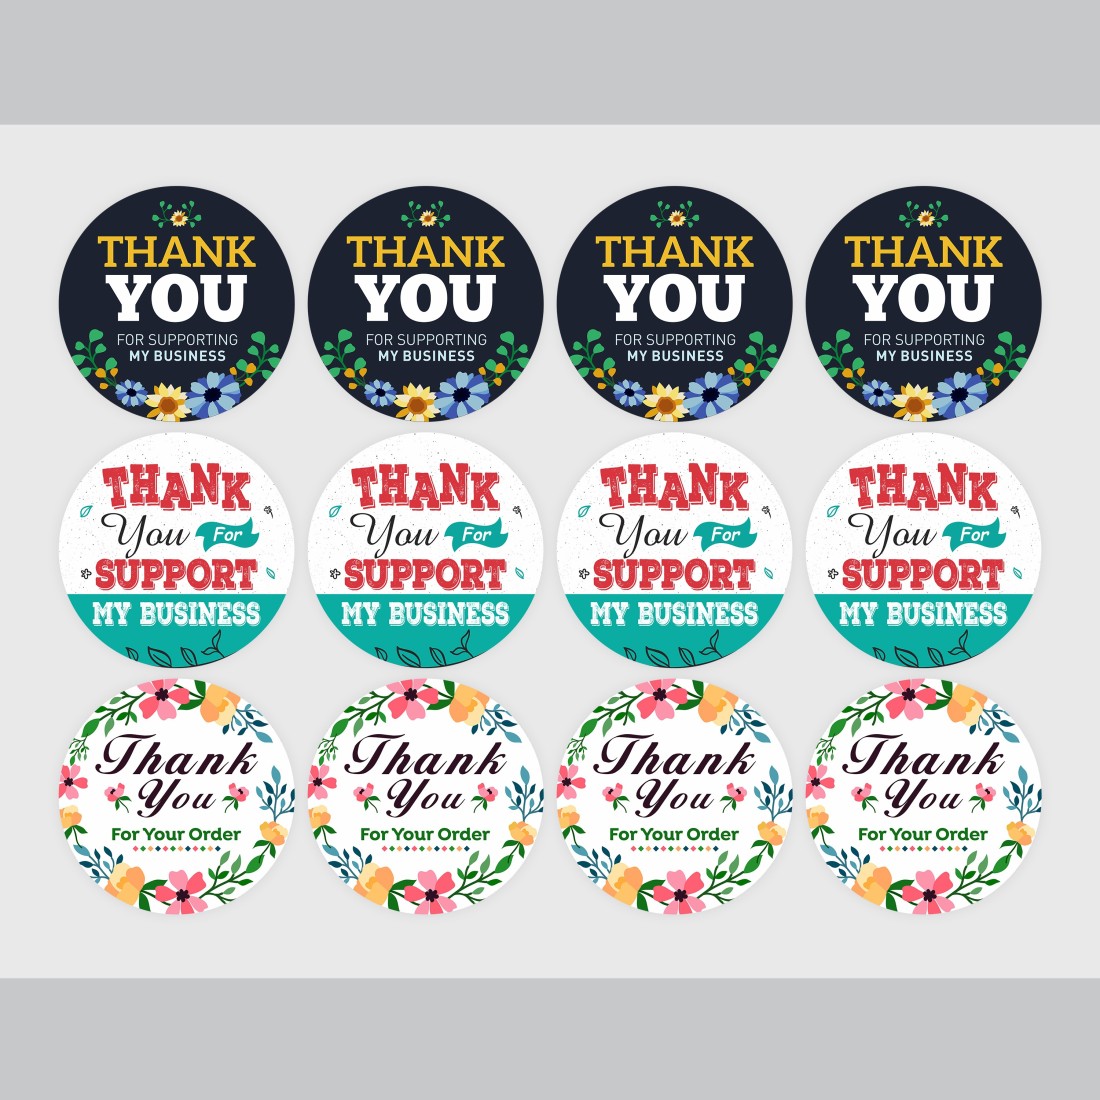 CLICKEDIN 3.81 cm Thank you stickers Self Adhesive Sticker Price in India - Buy  CLICKEDIN 3.81 cm Thank you stickers Self Adhesive Sticker online at